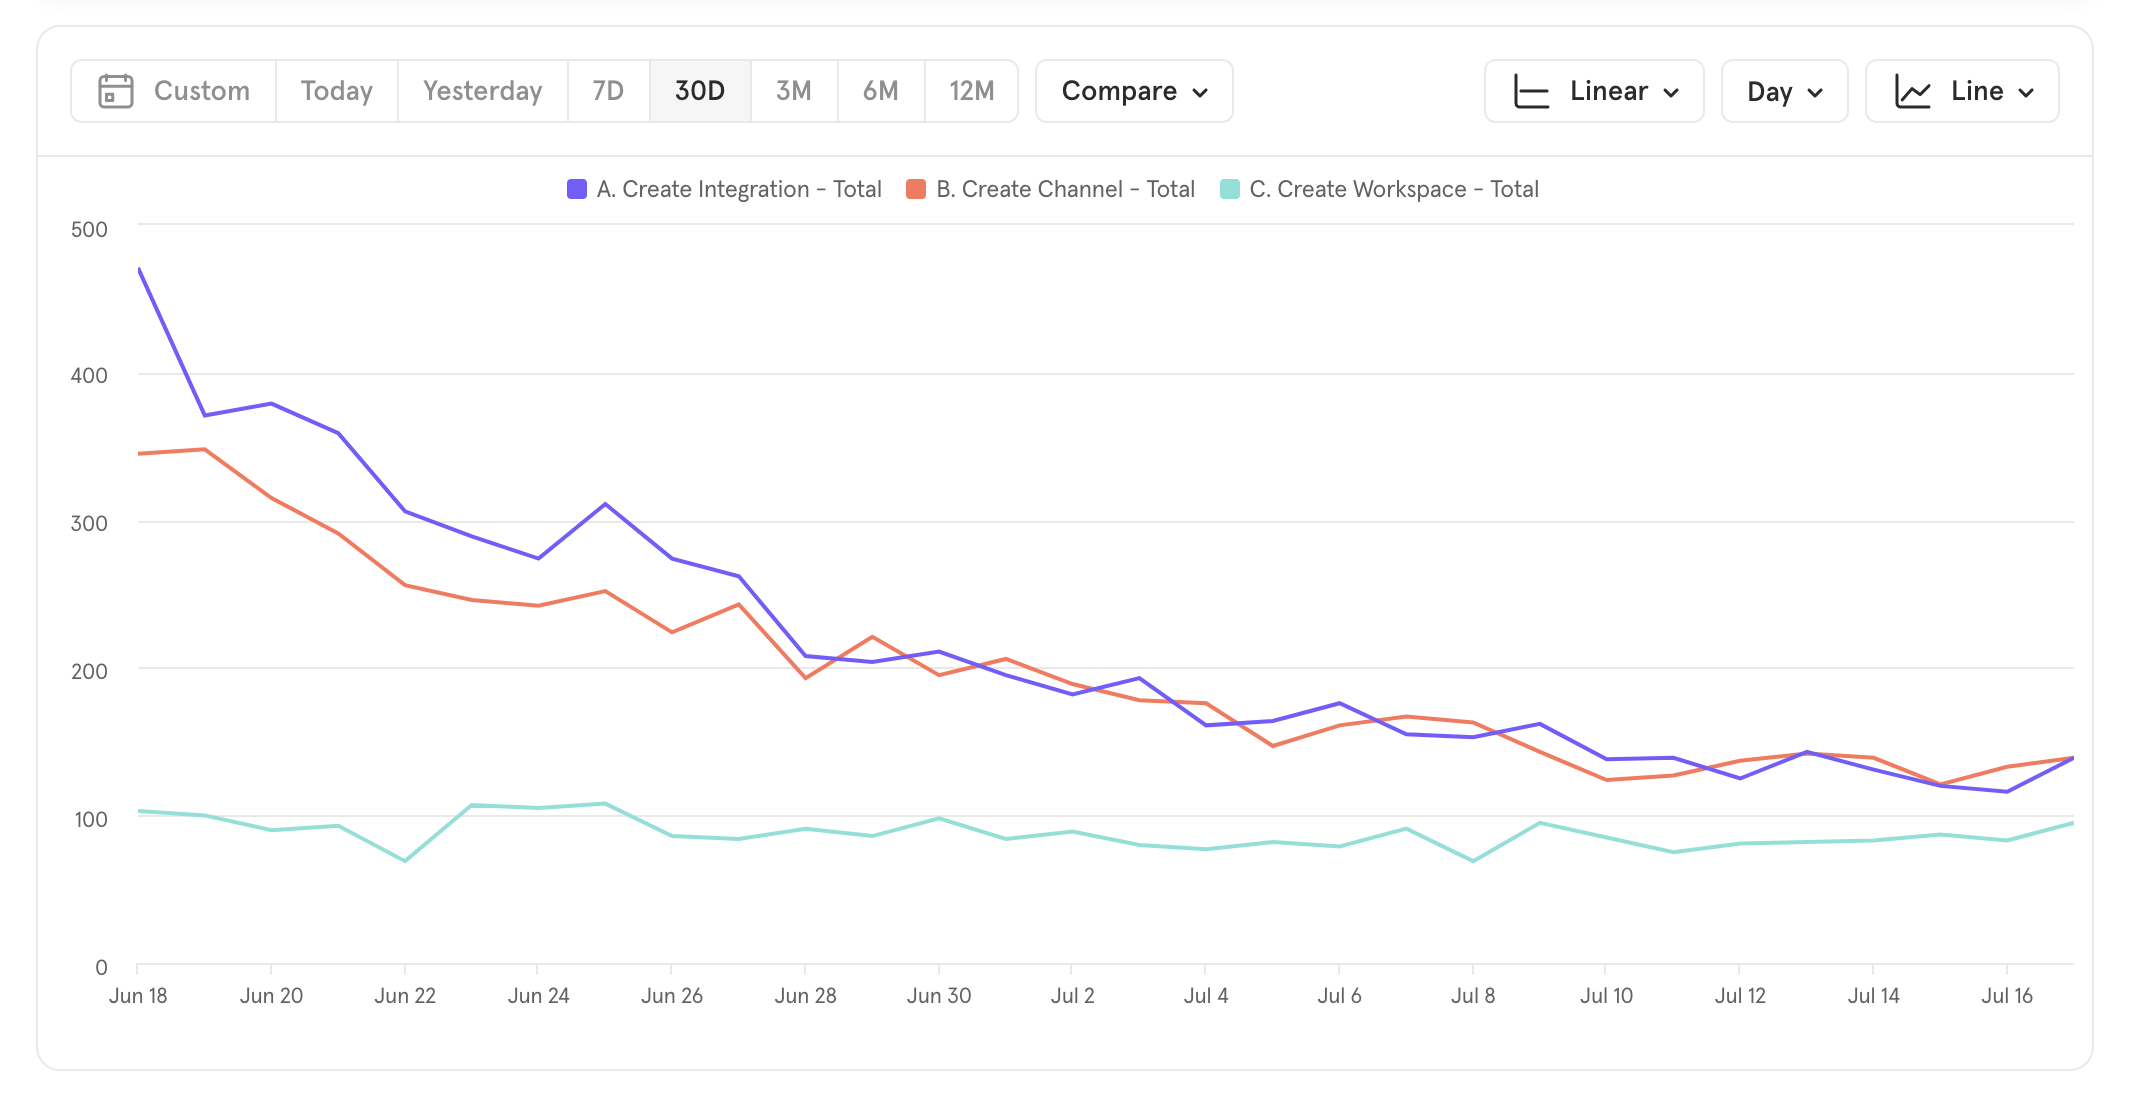 This Mixpanel Insights report shows the channel and integration features aren’t being used as often as before, which means they should be the focus of customer feedback.